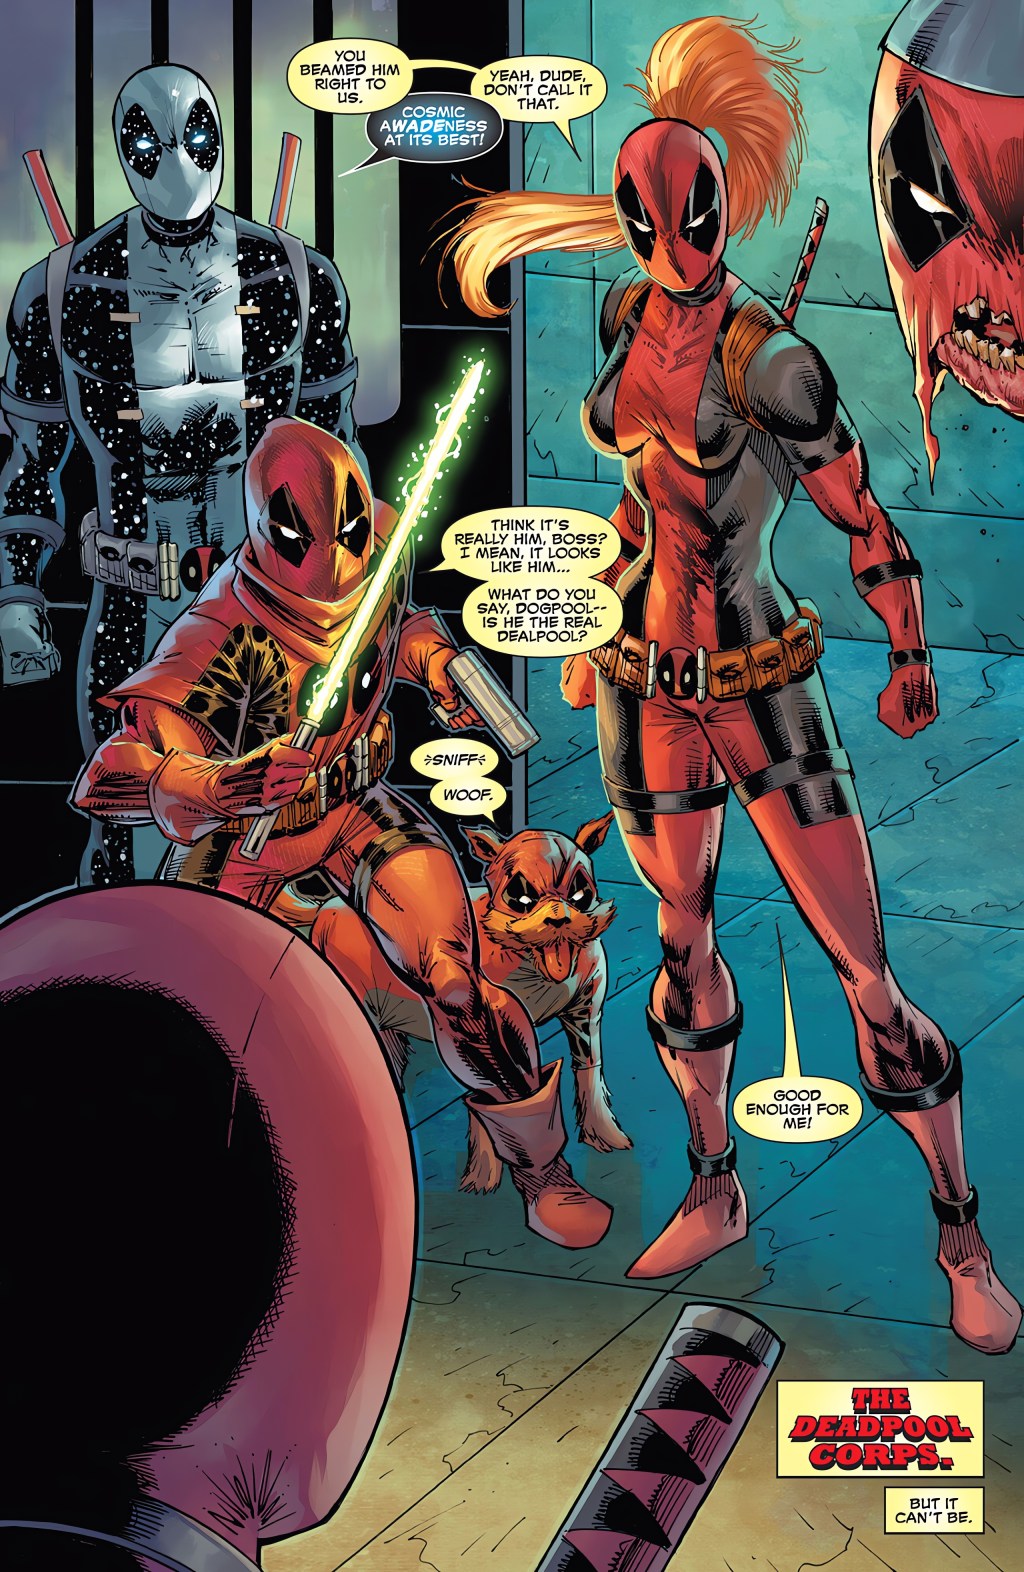 The Deadpool Corps reunites with their eponymous leader in Deadpool: Badder Blood Vol. 1 #3 (2023), Marvel Comics. Words by Rob Liefeld and Chad Bowers, art by Rob Liefeld, Jay David Ramos, and Joe Sabino.